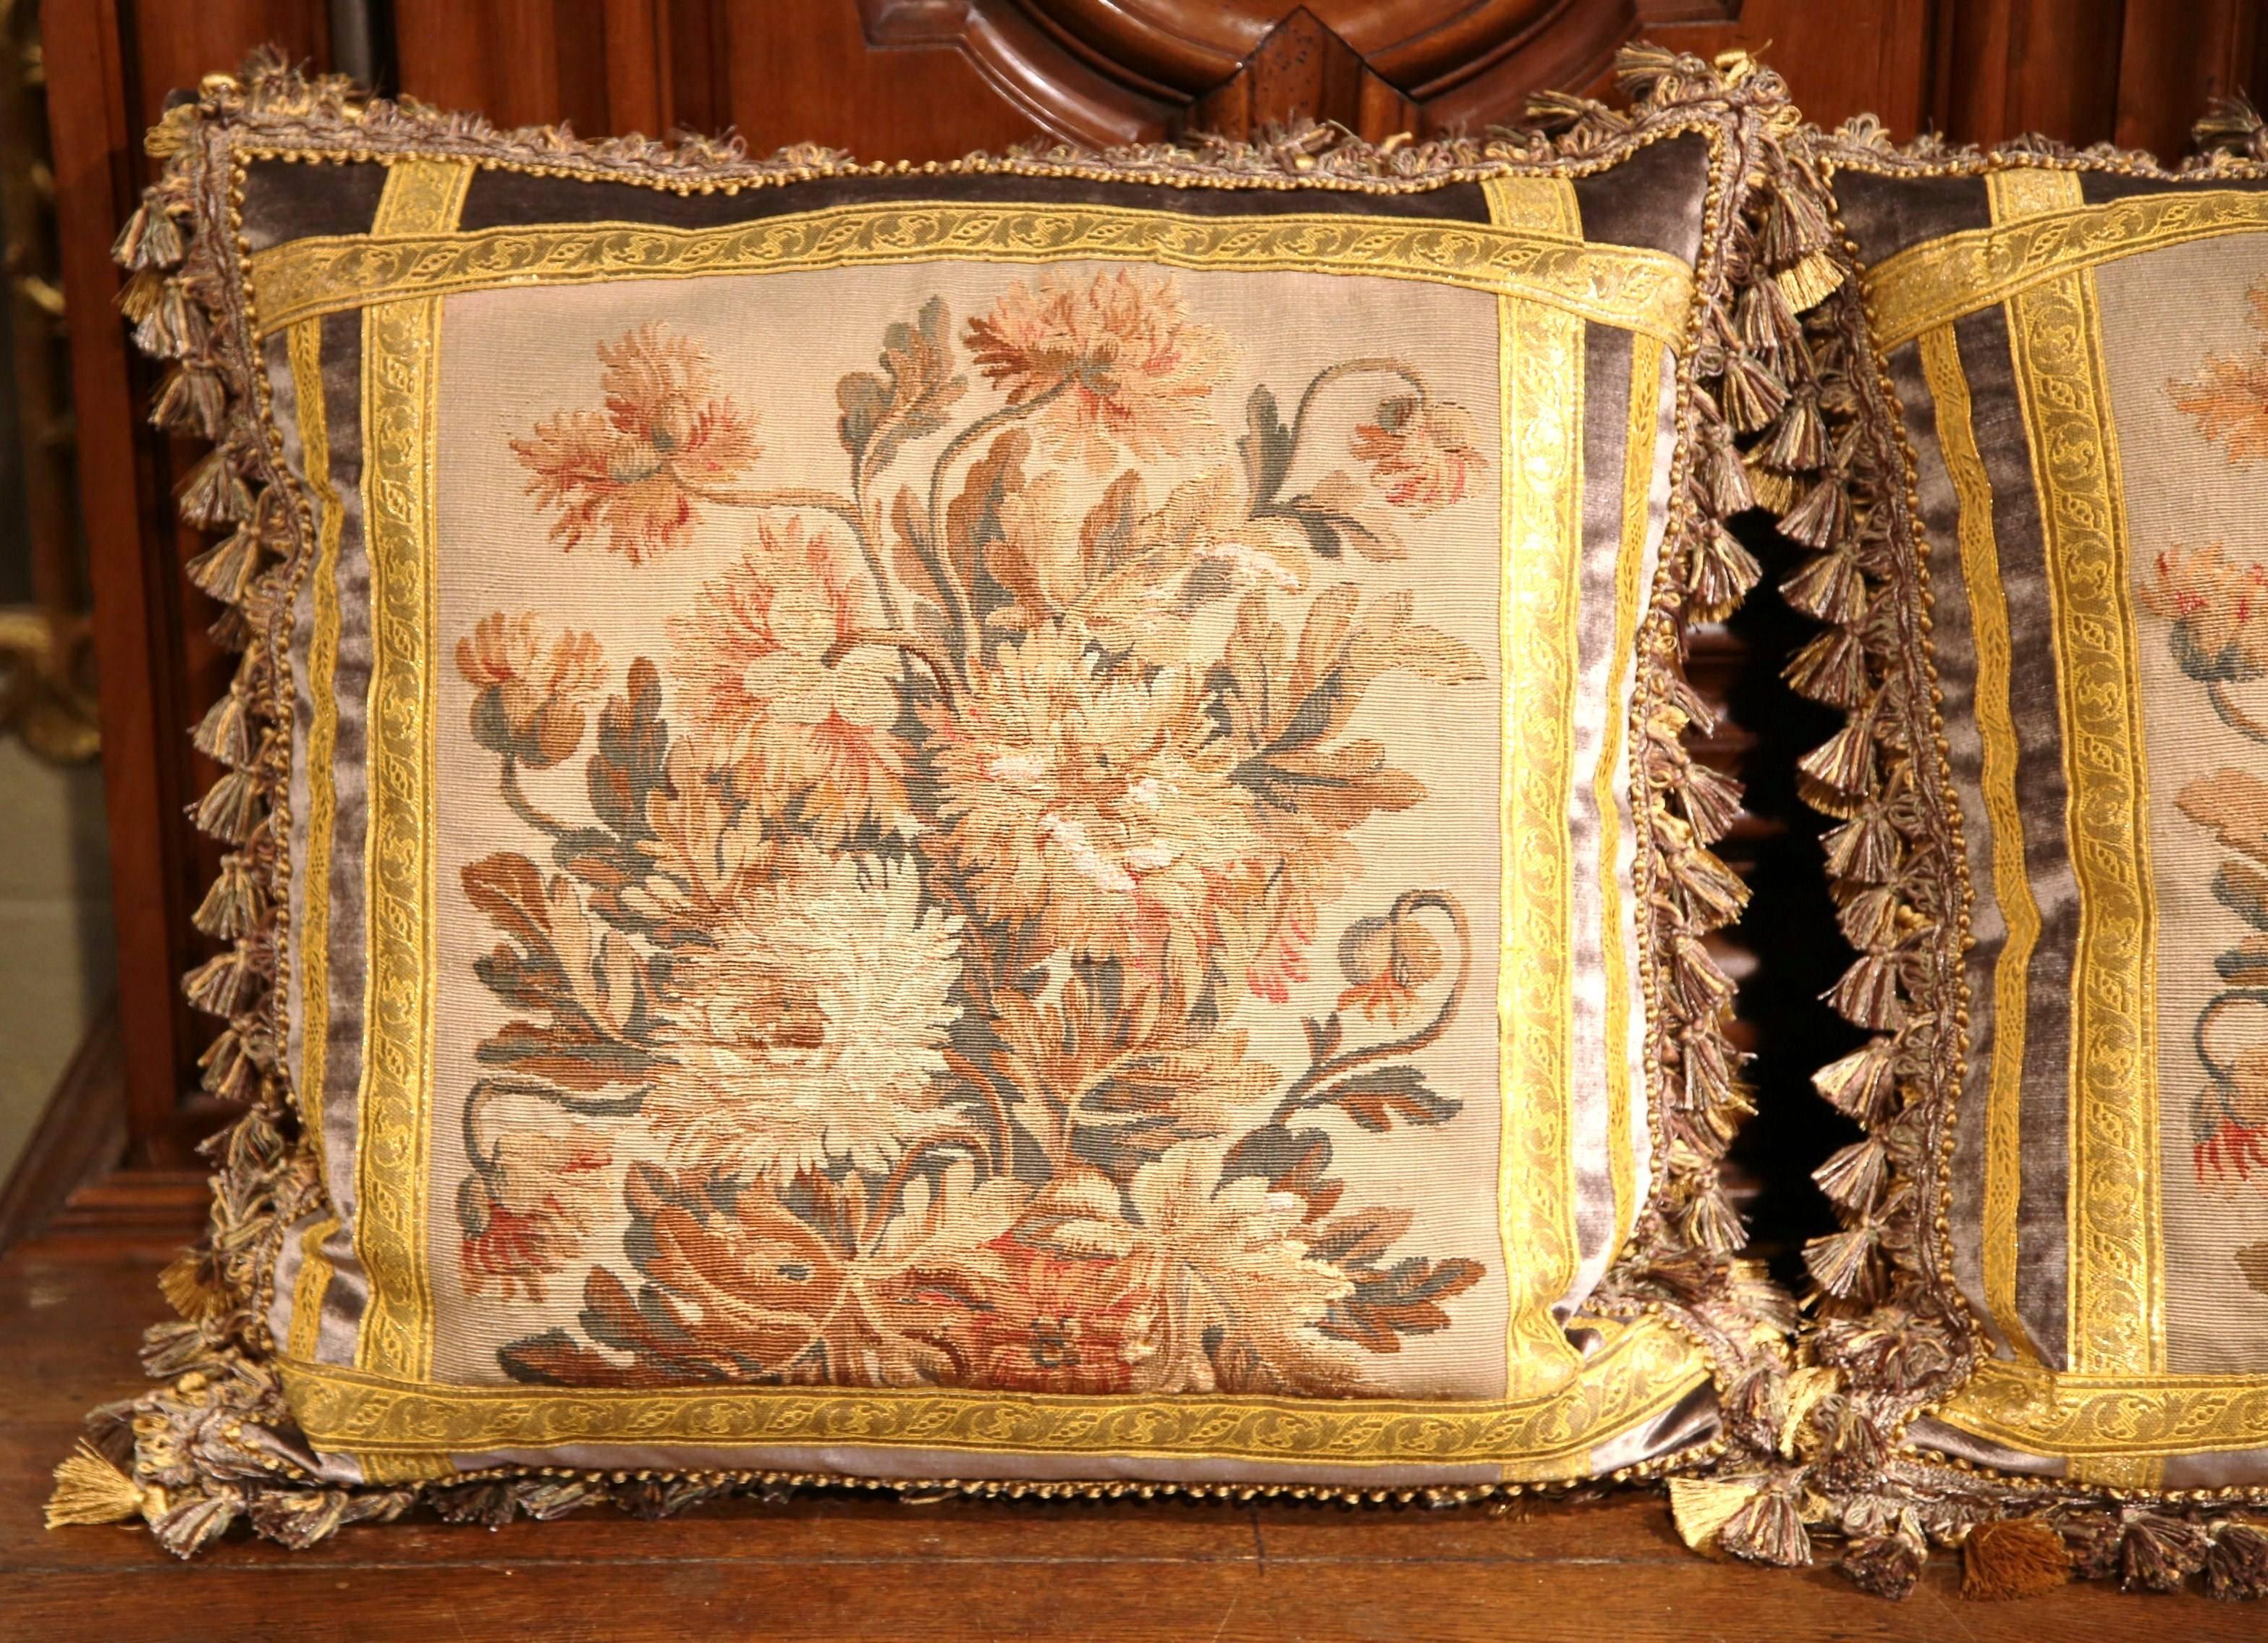 This elegant pair of pillows were crafted using fragments of antique floral tapestry from Aubusson, France. Each of the unique, handmade pillows feature antique, gold trim with complementary tassels and velvet details. The pillows are in excellent